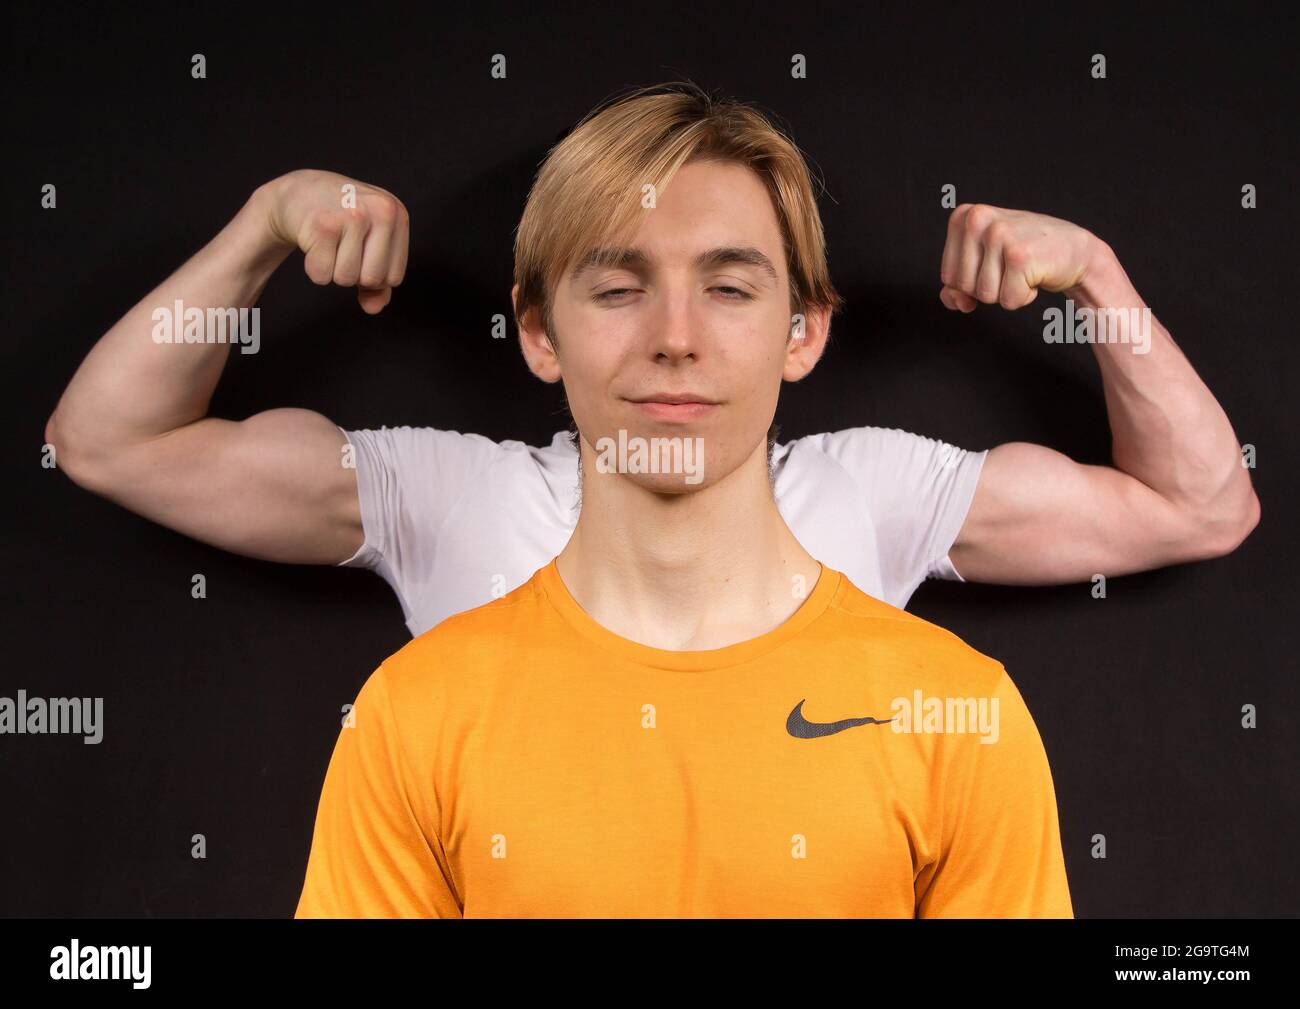 A male youth daydreams about having big muscular arms, as another youth flexes his biceps behind him Stock Photo